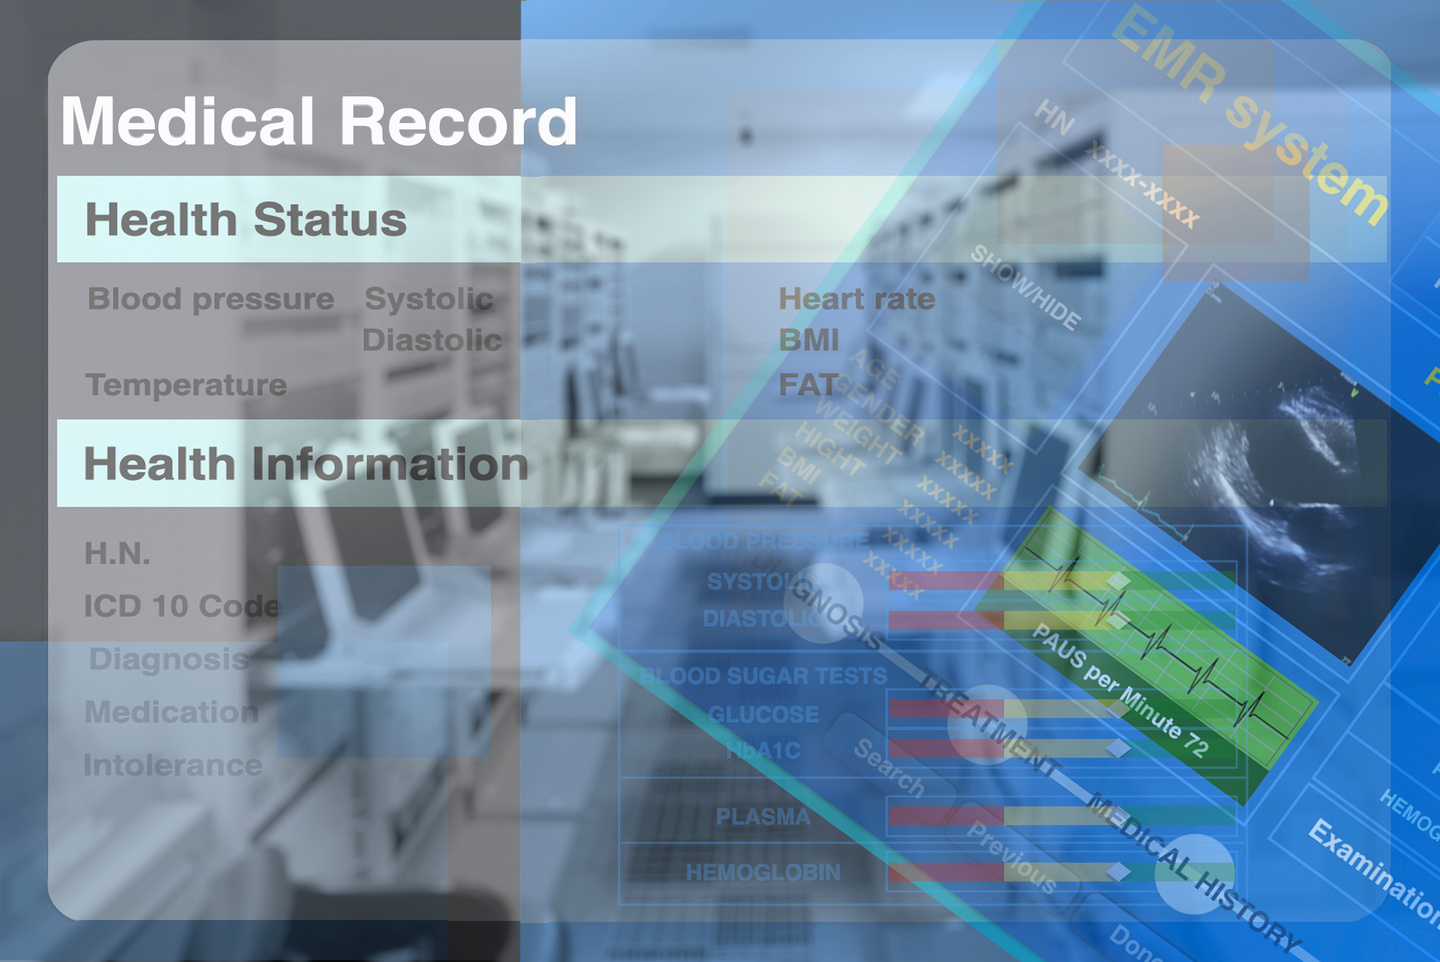 Background image of computer screen showing electronic medical records application with computer lab.